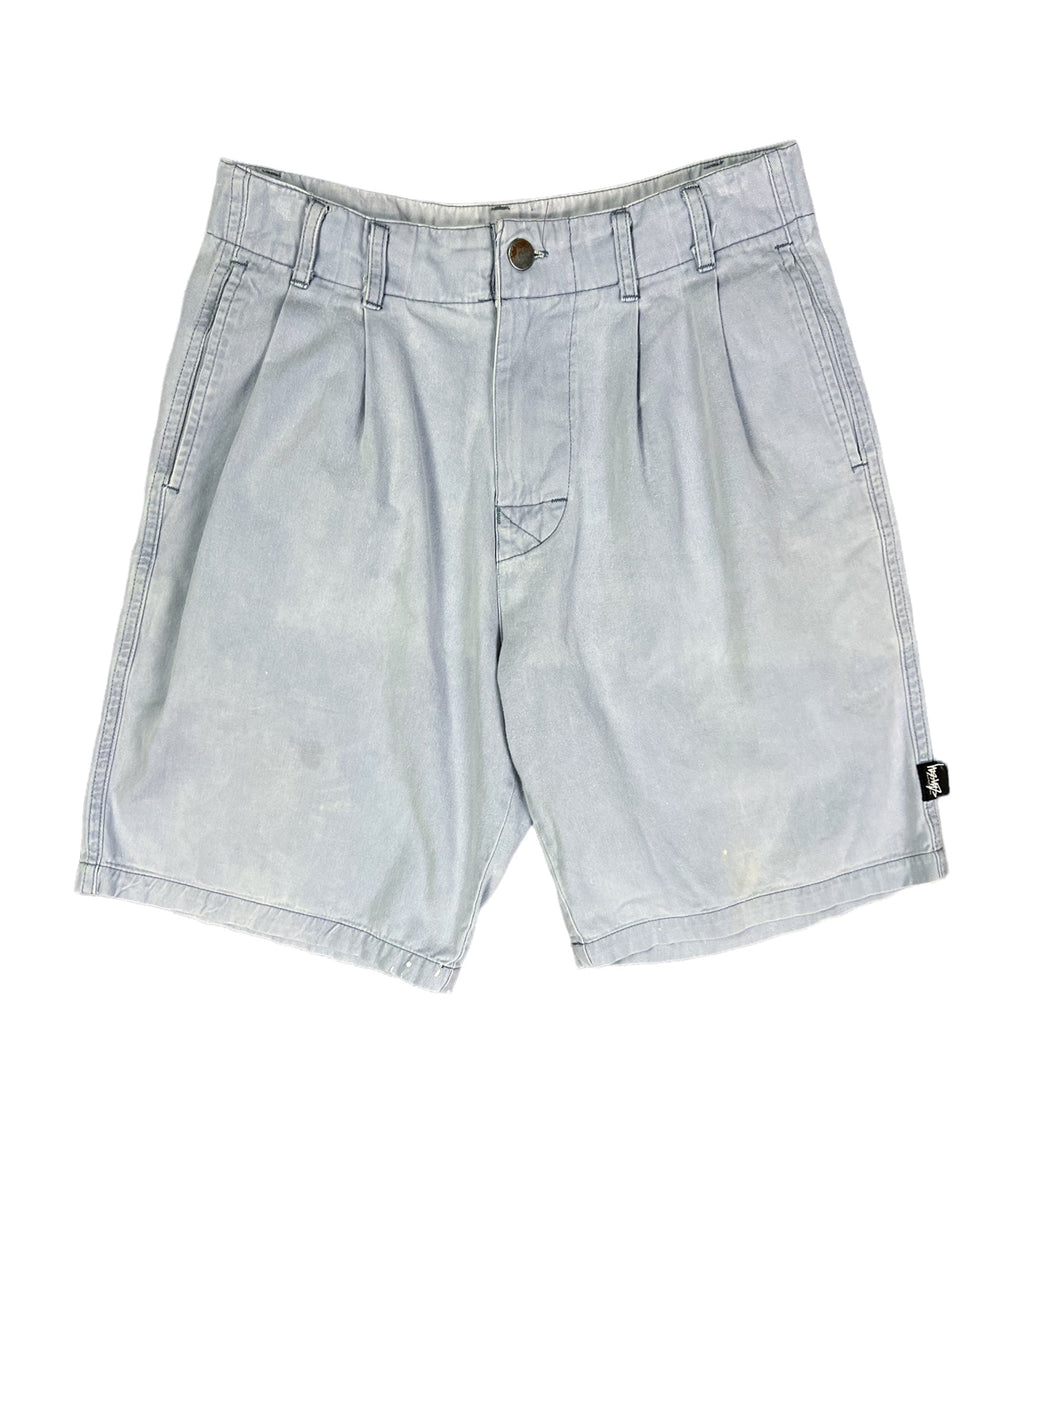 Vintage Stussy Chino Beach Shorts (Early 90s)